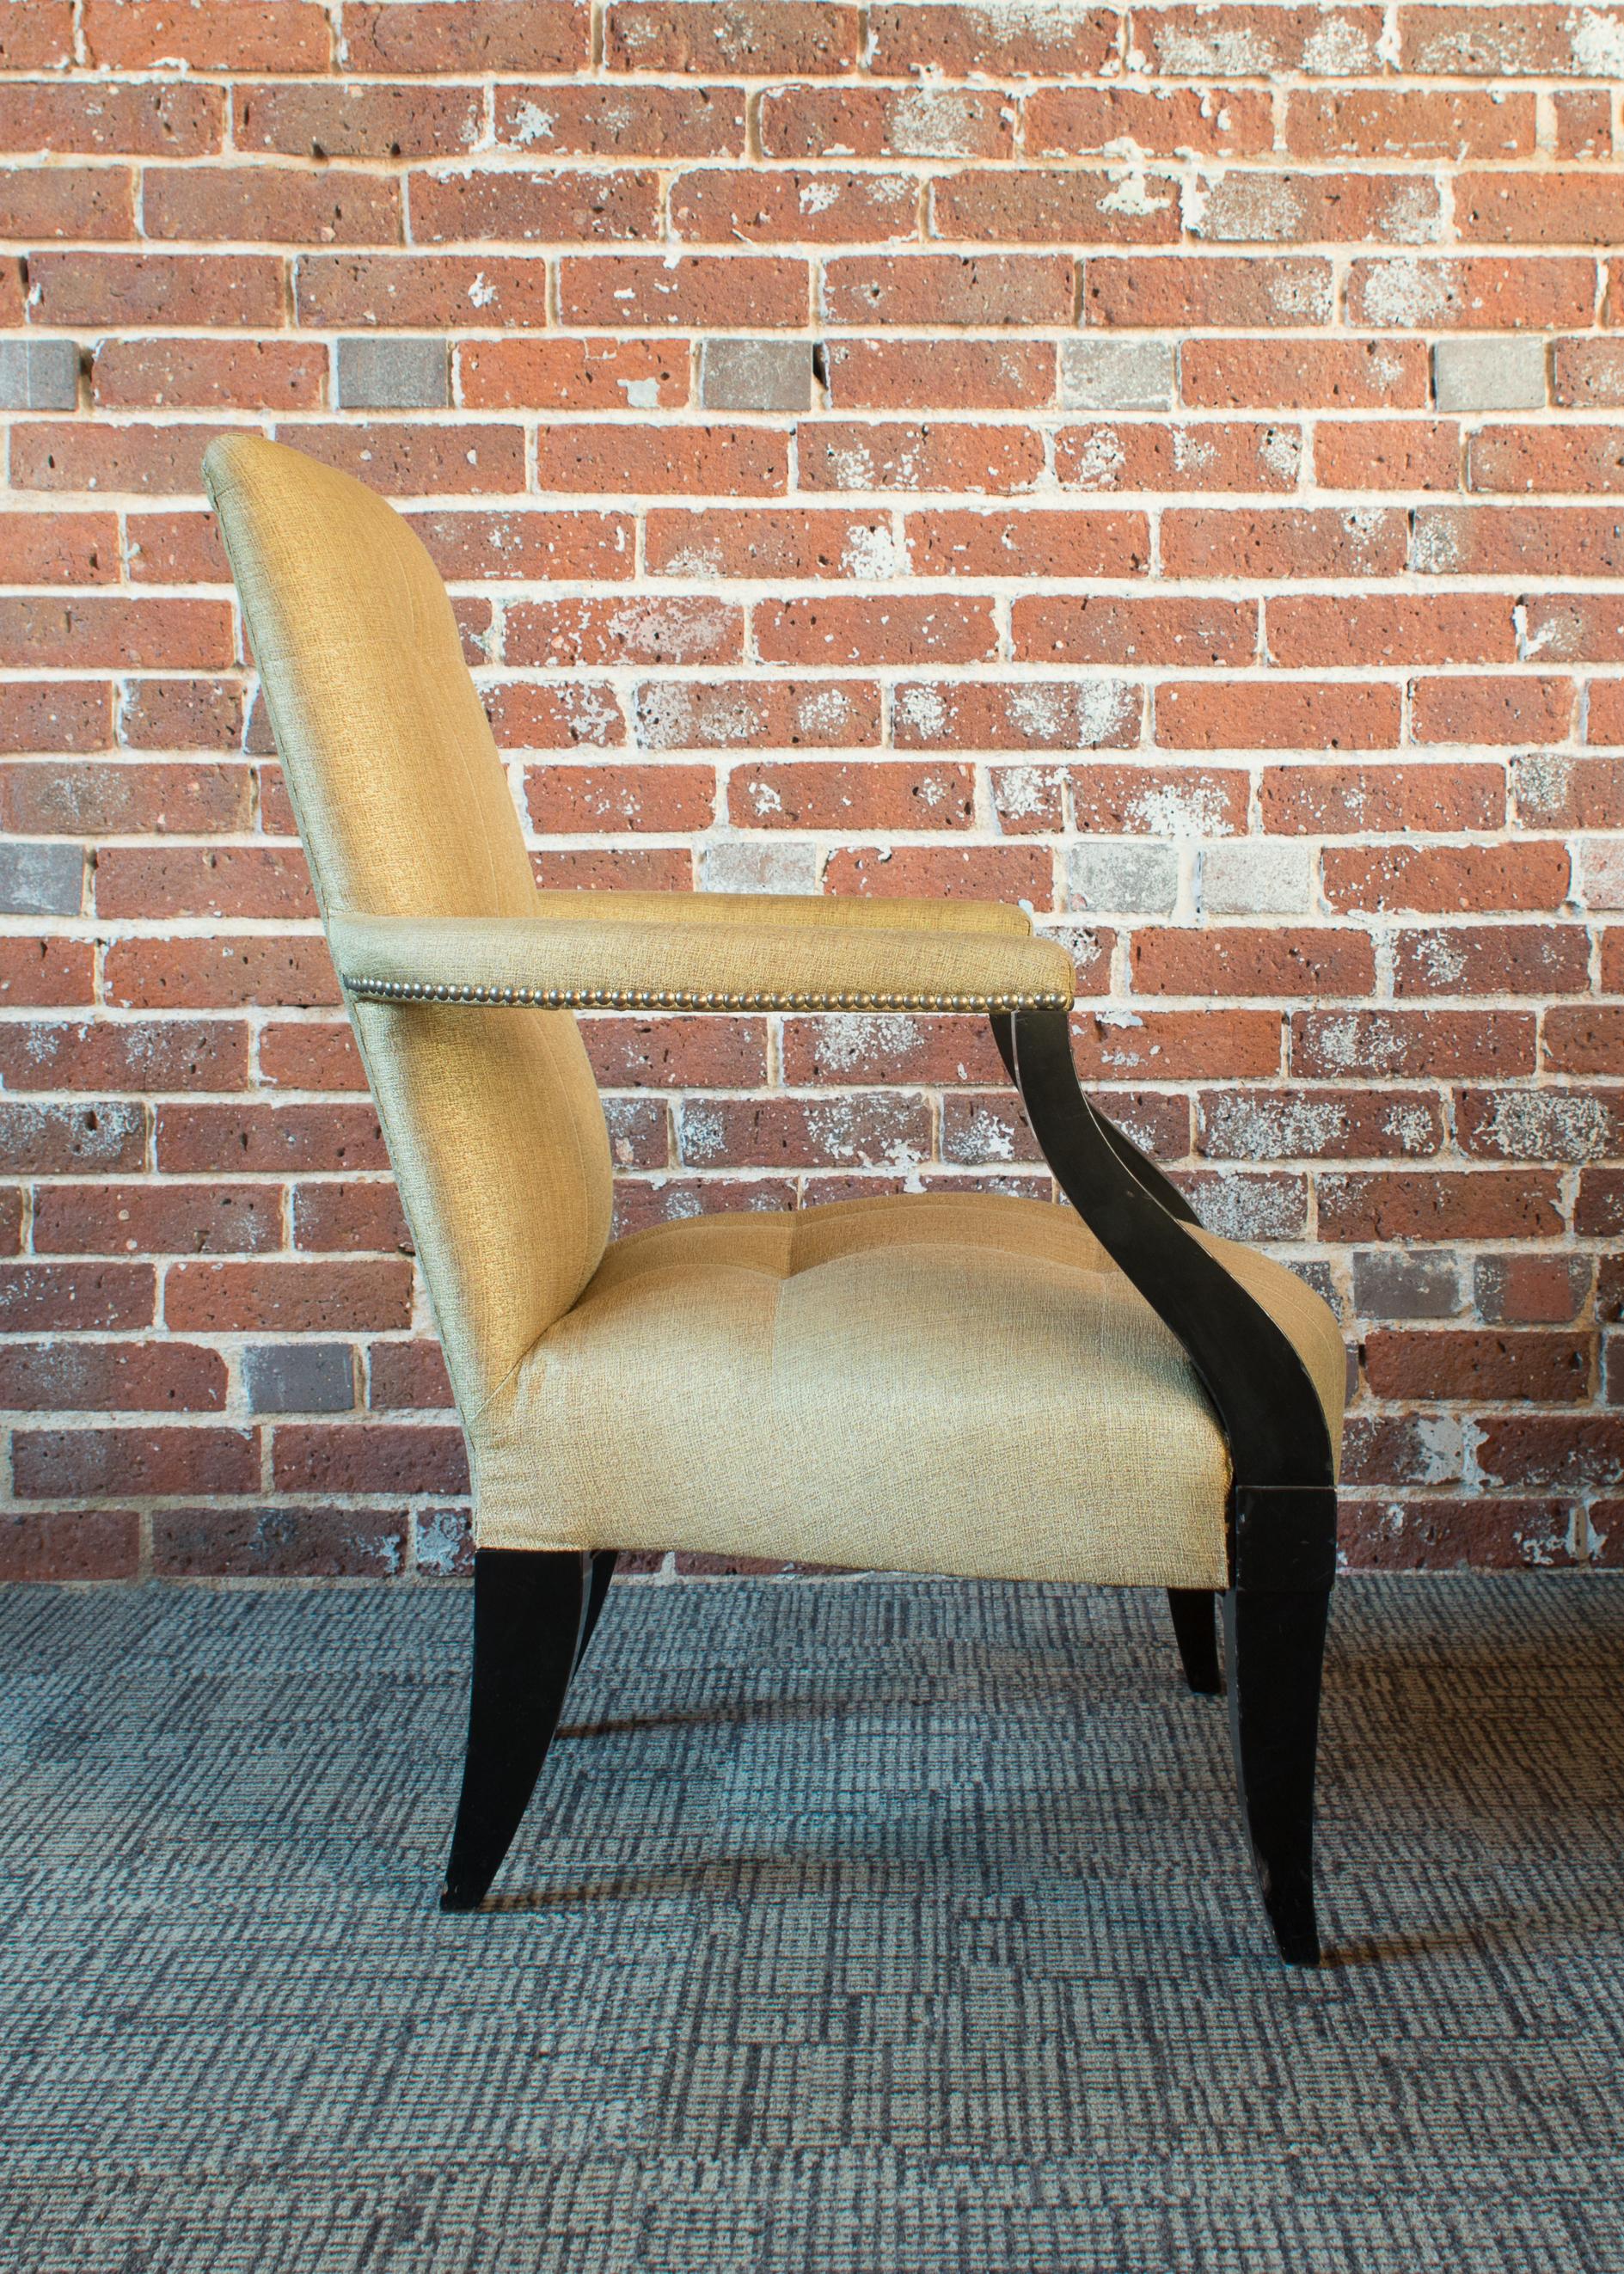 An intriguing juxtaposition of lines and curves, this occasional chair offers square seaming details and shallow tufting on tight inside seat and inside back.
Fabric is a timeless silk.
Nail head details on arms in antiqued brass bring to mind a